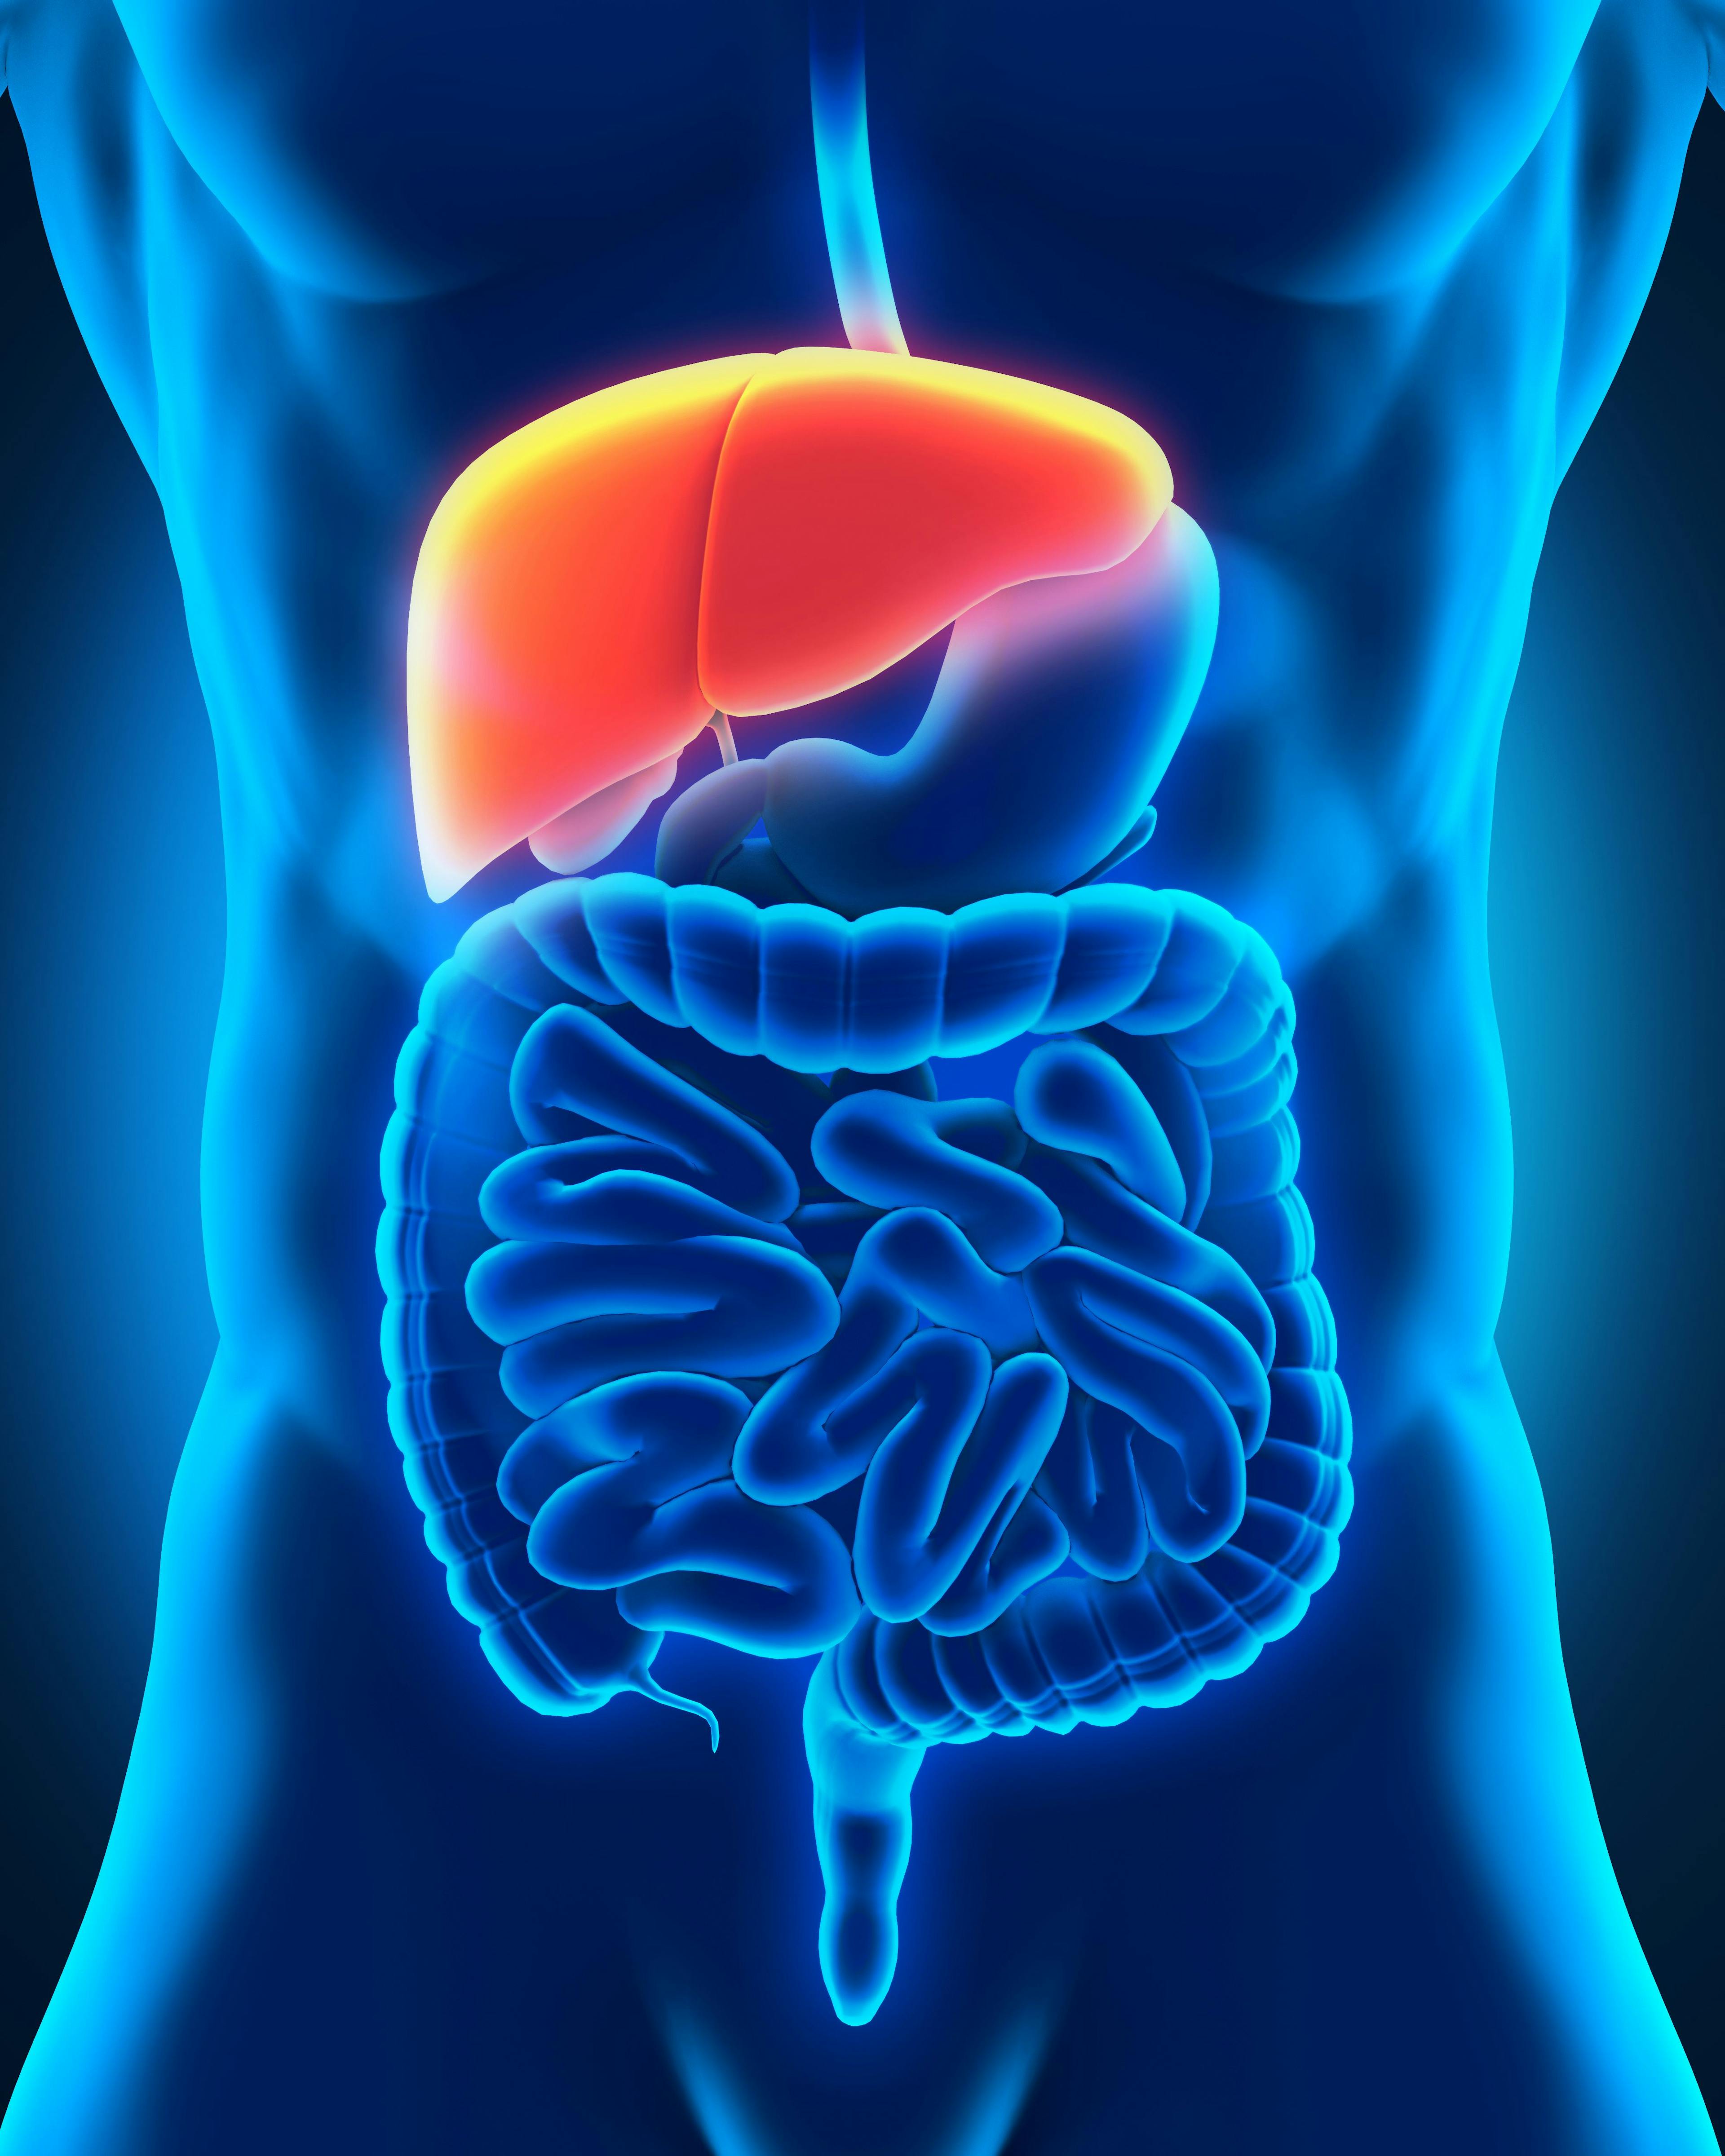 "One in 4 patients treated with [durvalumab plus tremelimumab] were still alive at 4 years, reinforcing this novel regimen as a standard of care in this setting," according to Bruno Sangro, MD, director of the Liver Unit and professor of Internal Medicine at Clínica Universidad de Navarra, Pamplona, Spain.